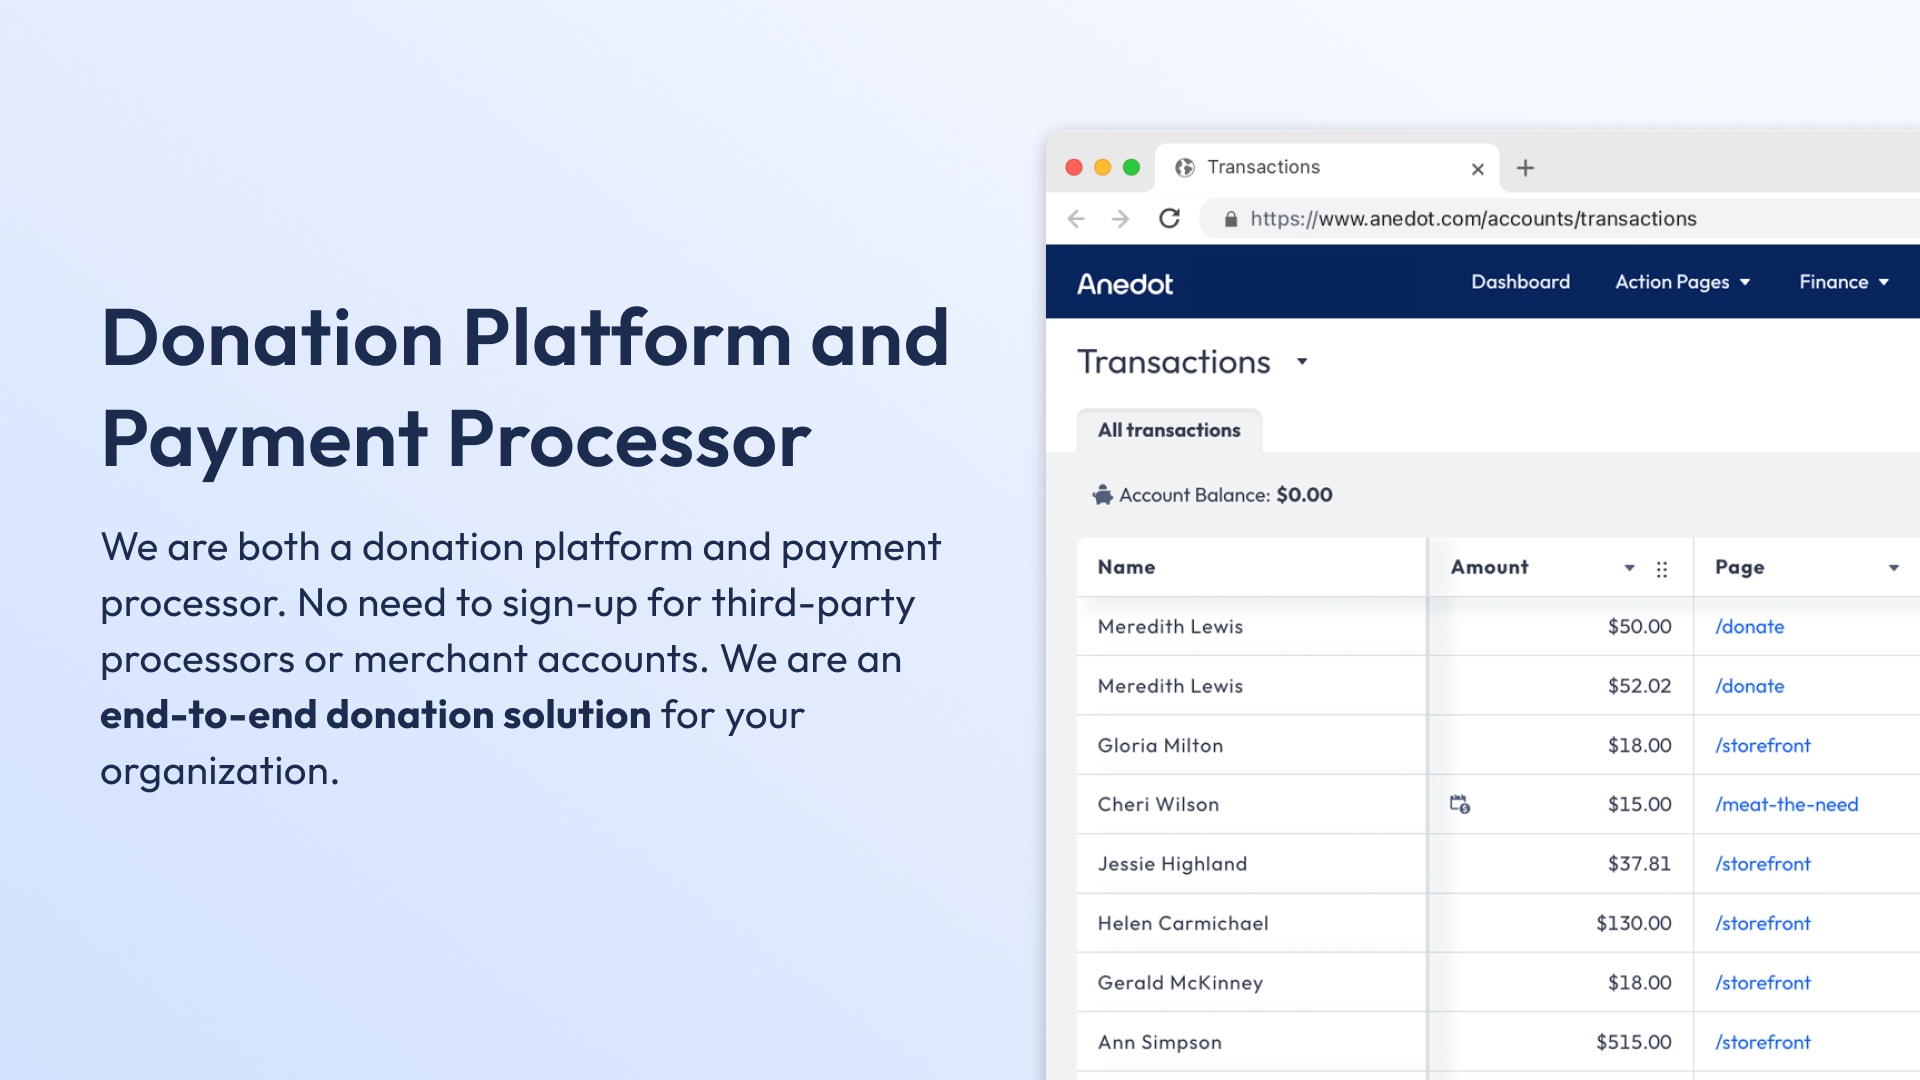 We are both a donation platform and payment processor. No need to sign-up for third-party processors or merchant accounts. We are an end-to-end donation solution for your organization.